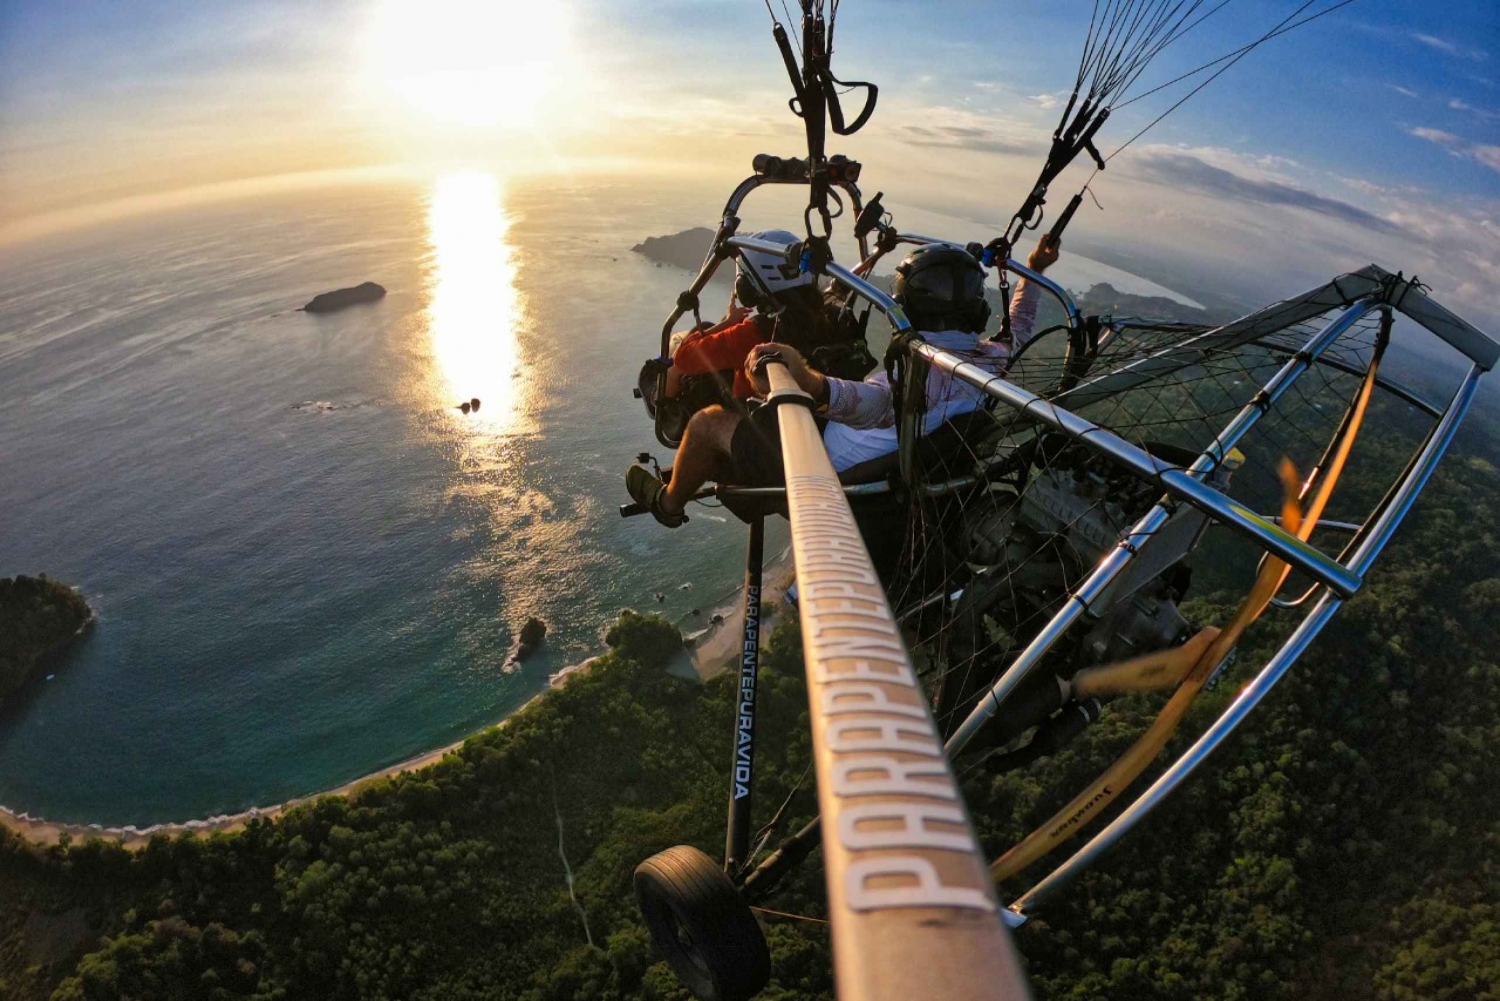 Jaco: Scenic Beach Paragliding Experience